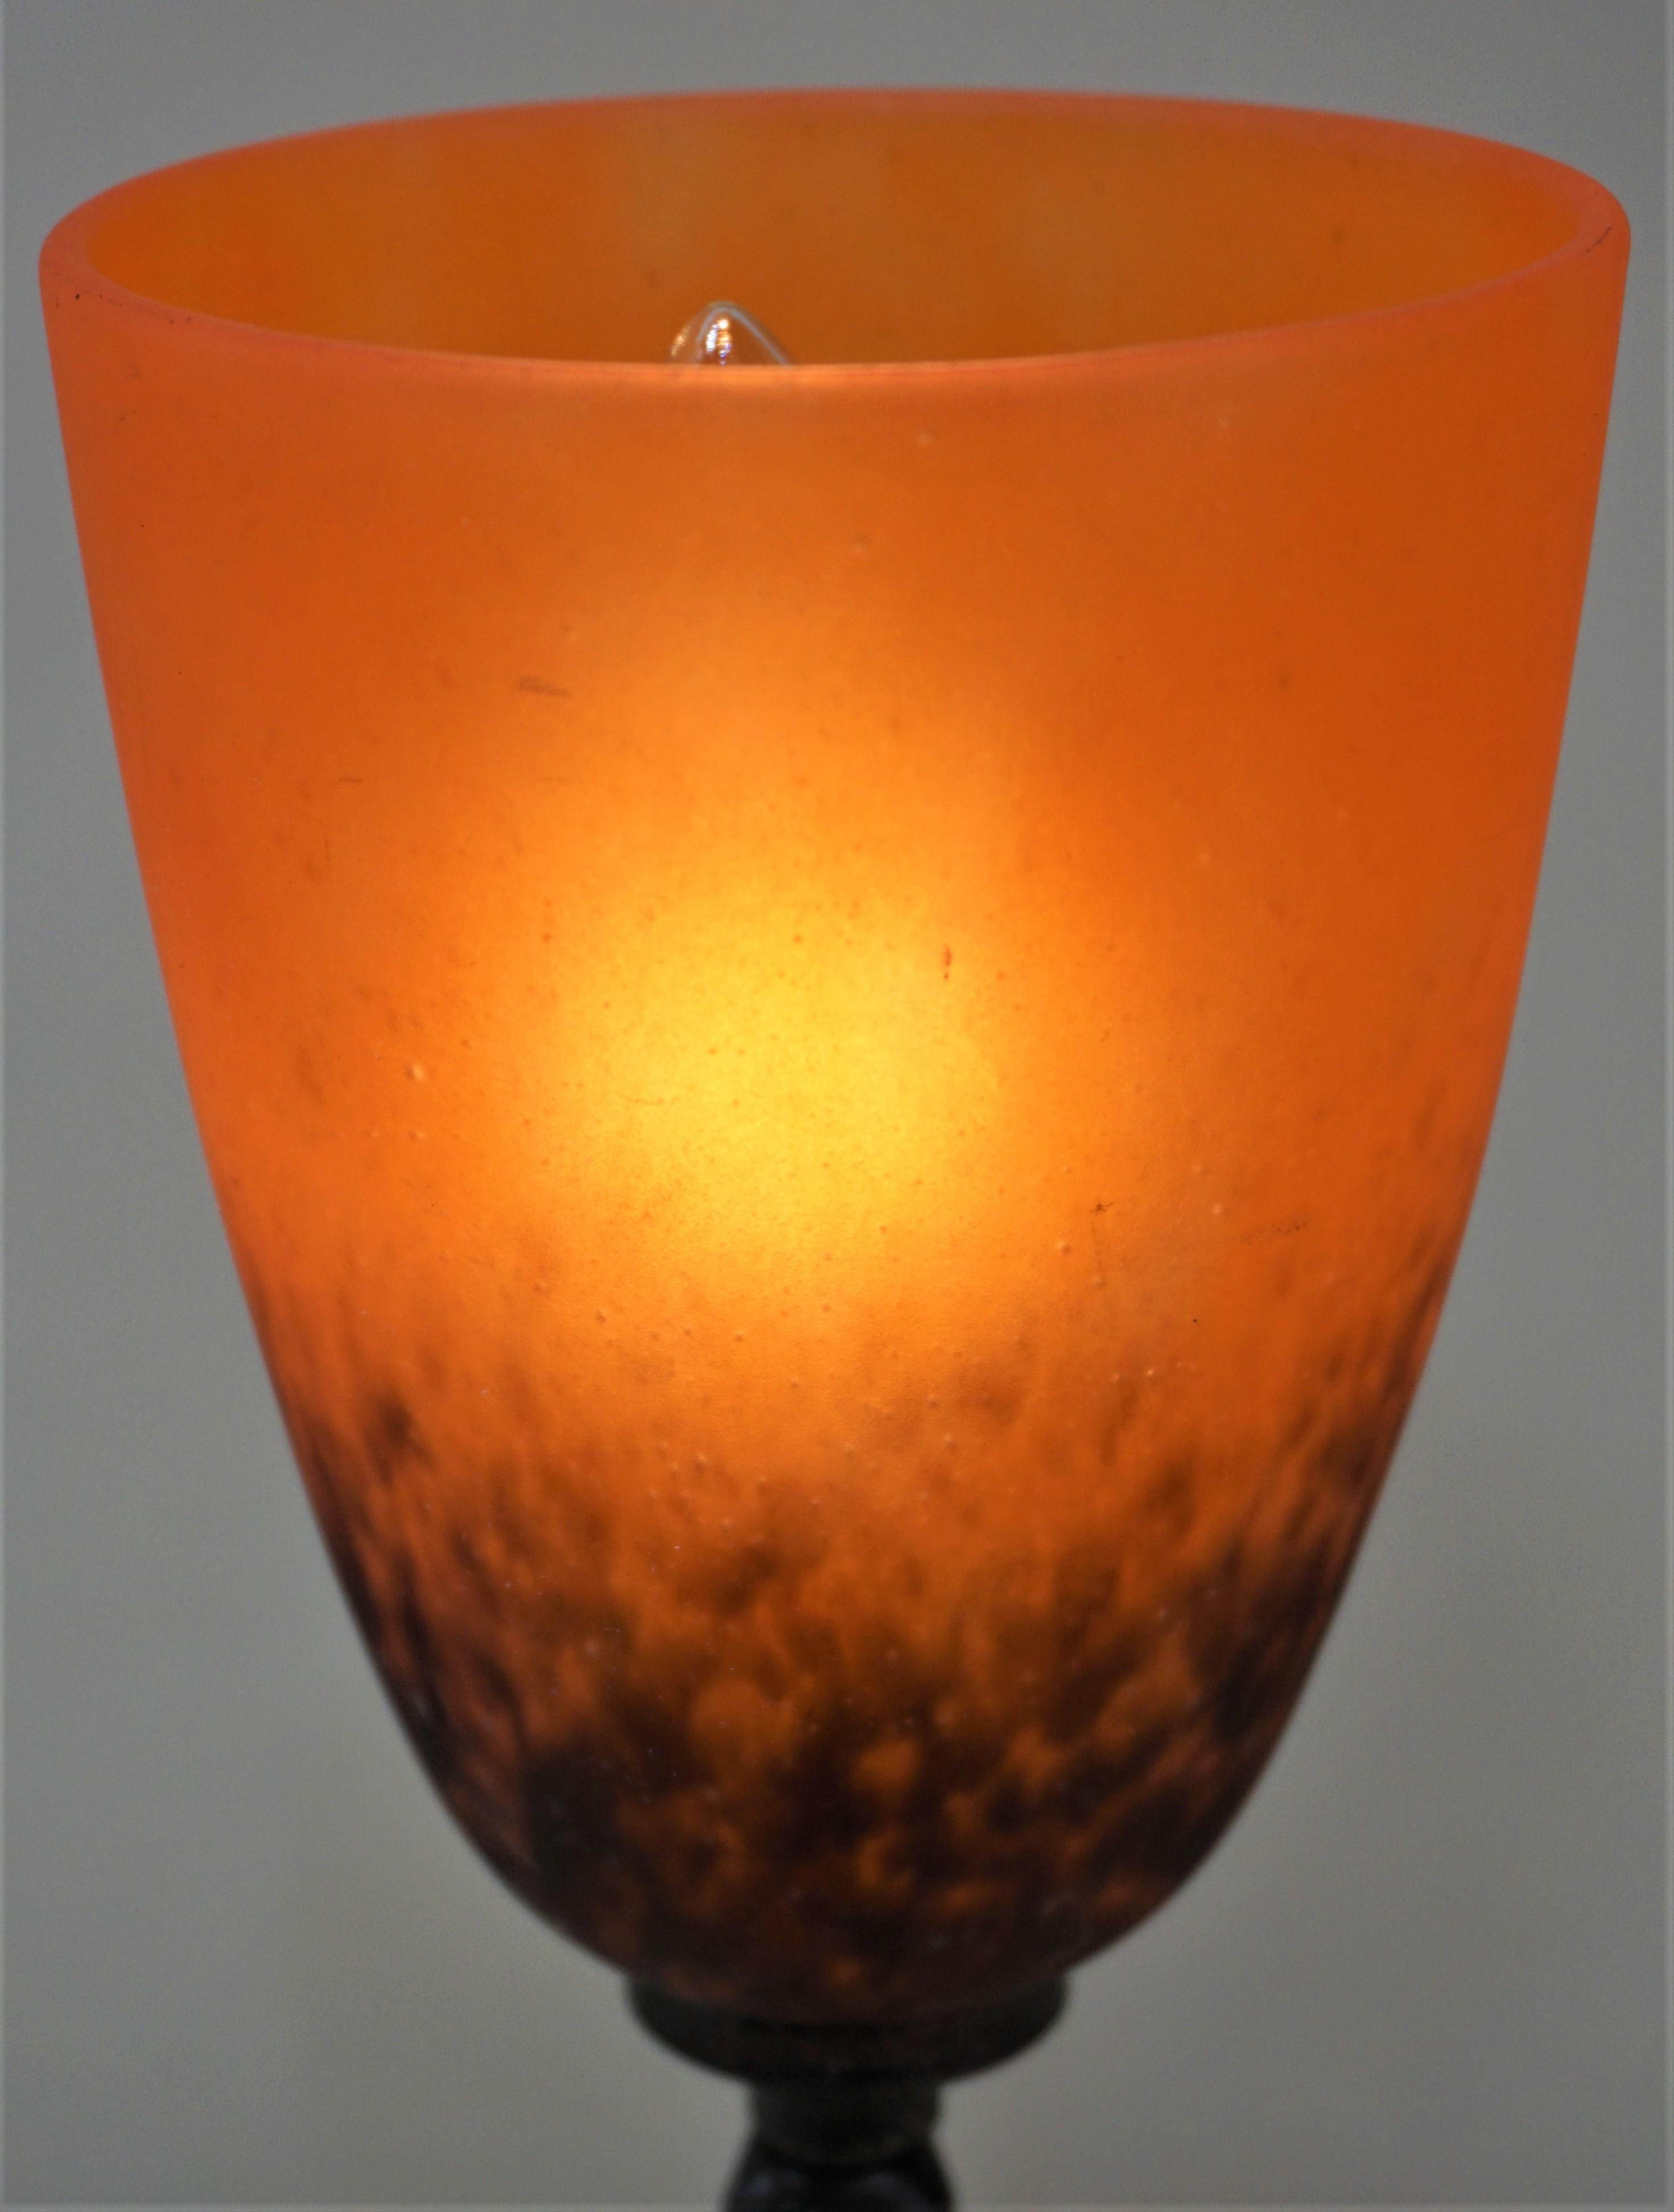 Wrought iron black or brown to orange red blown glass table lamp.